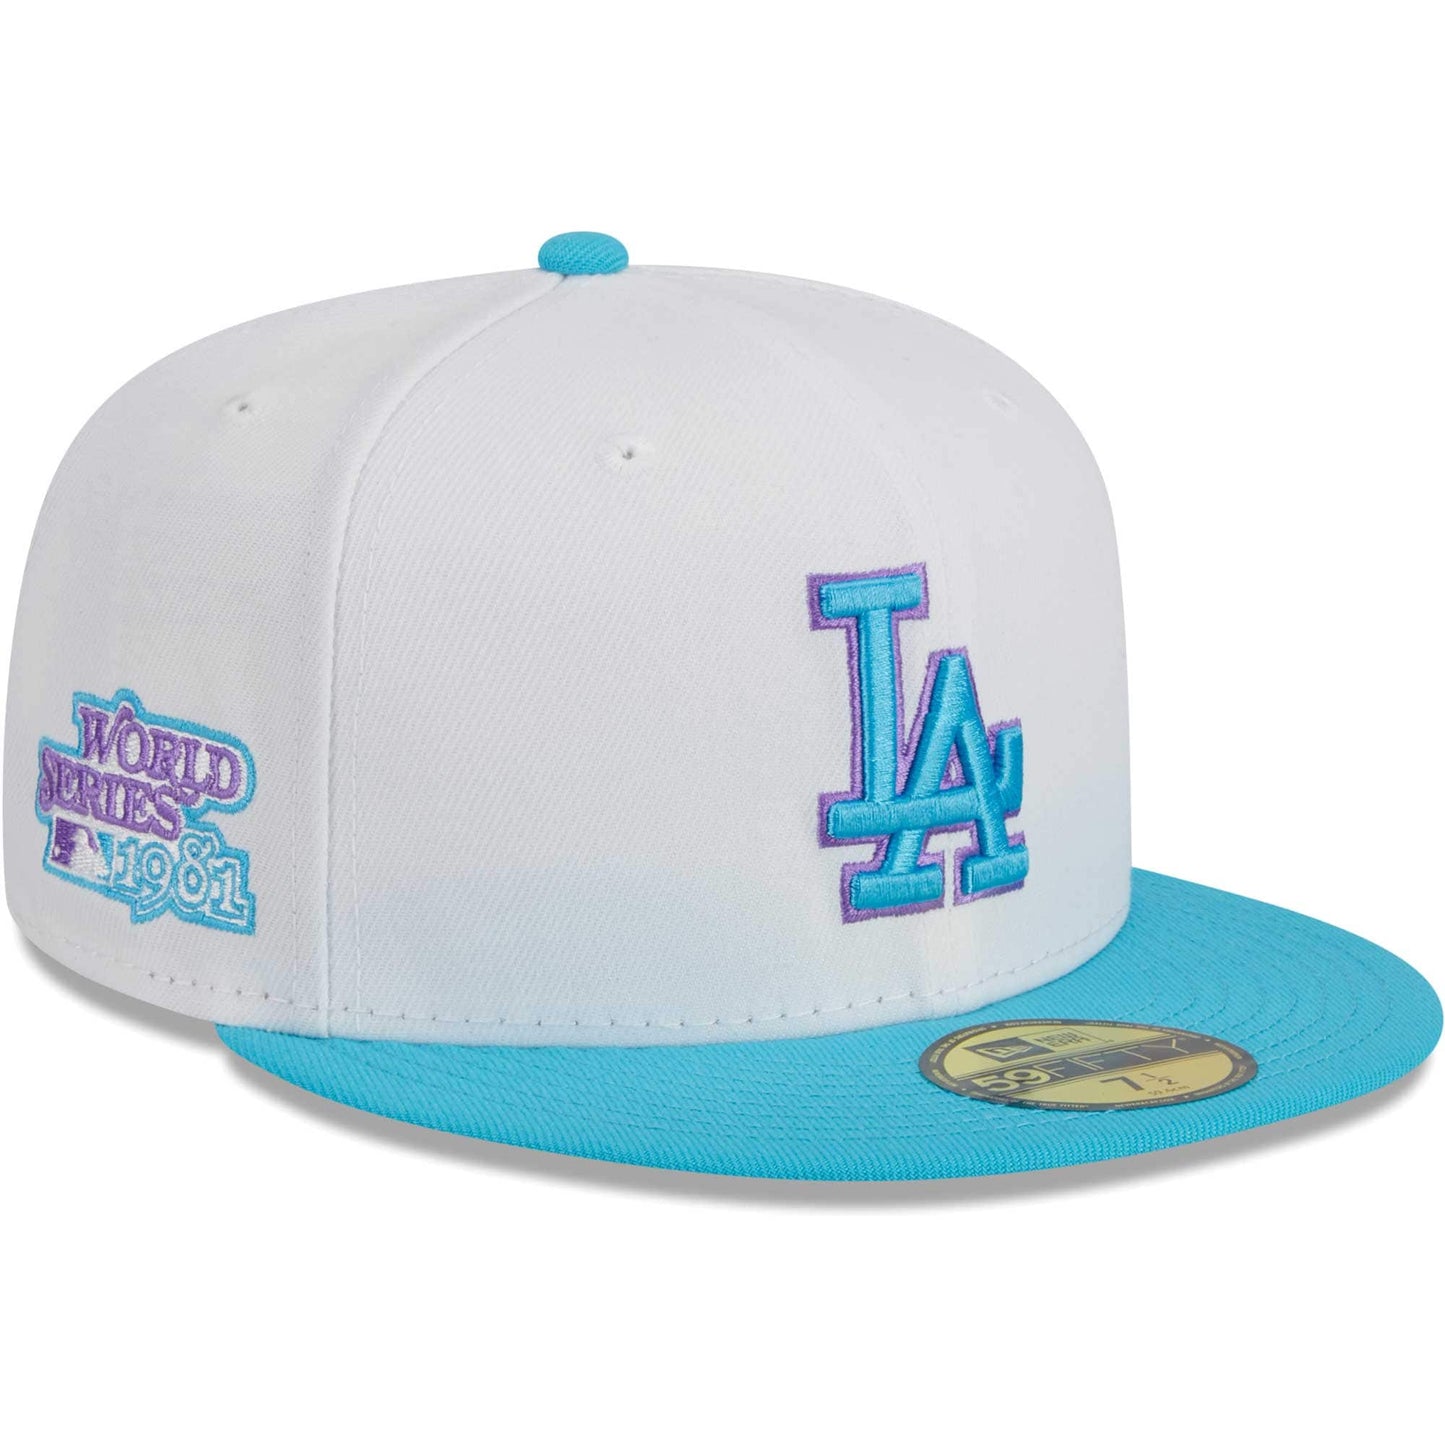 Los Angeles Dodgers New Era Vice 59FIFTY Fitted Hat - White